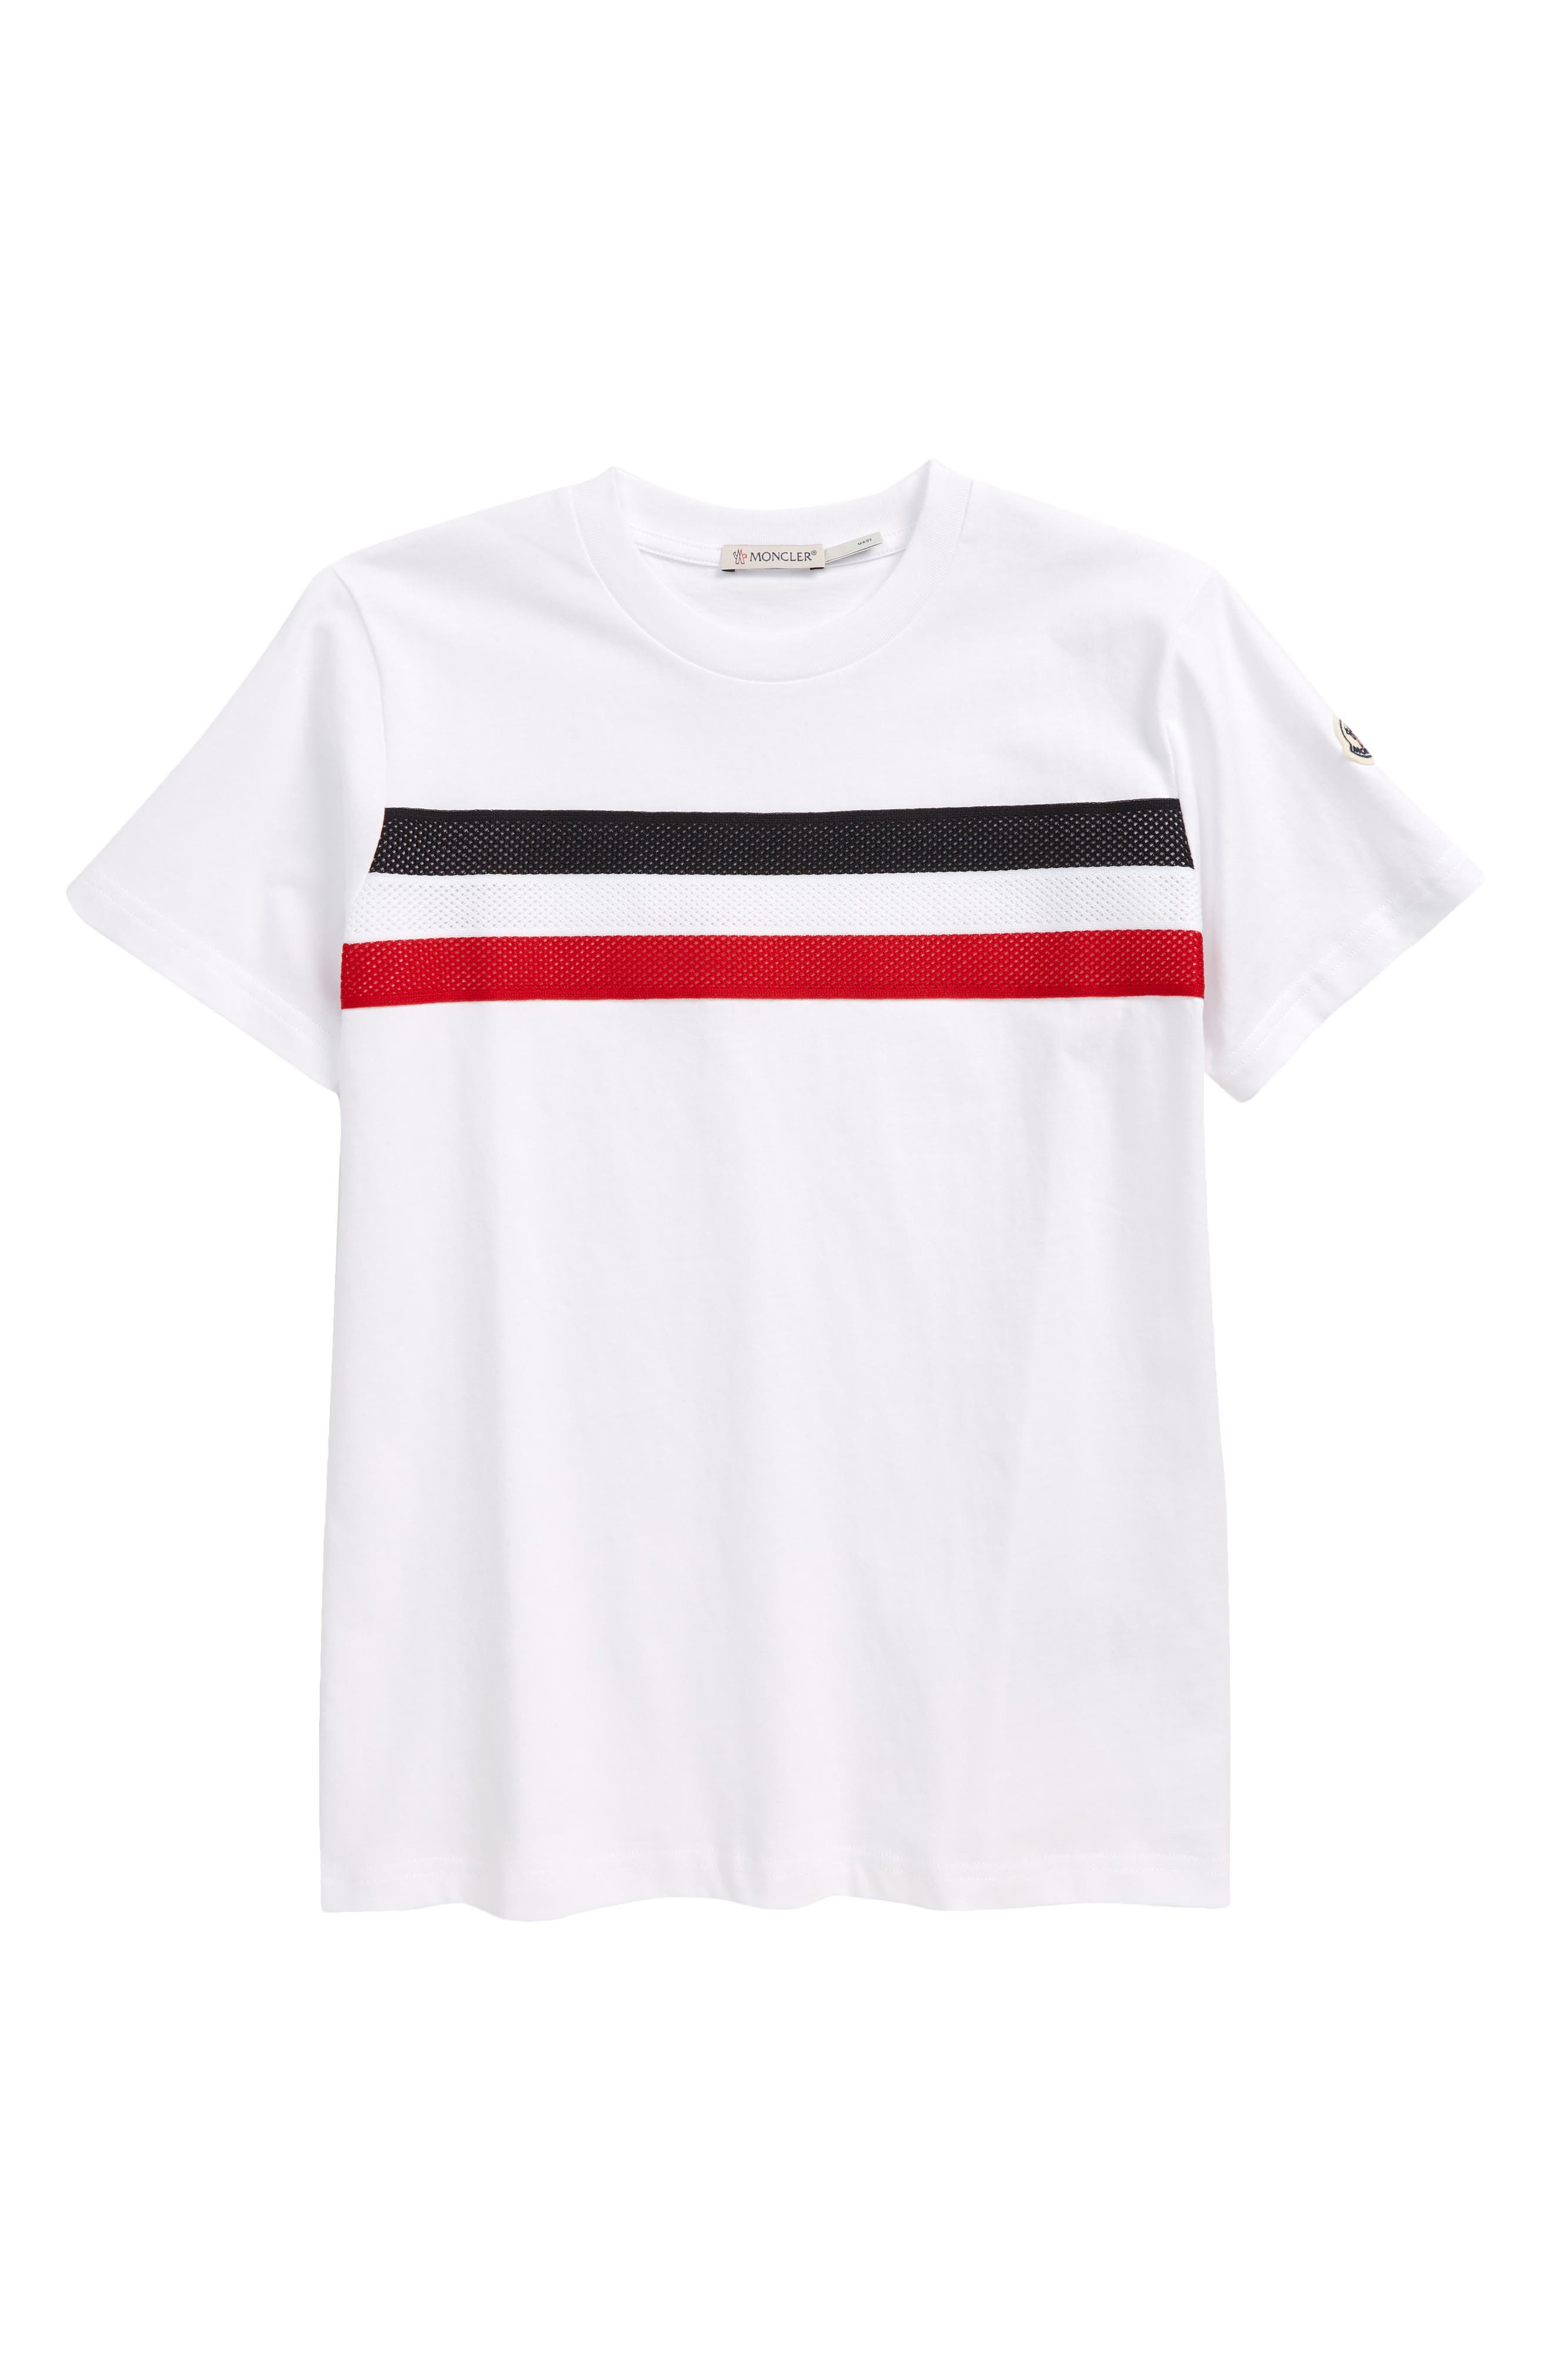 Moncler Kids' Mesh Flag T-Shirt in White at Nordstrom, Size 10Y Us